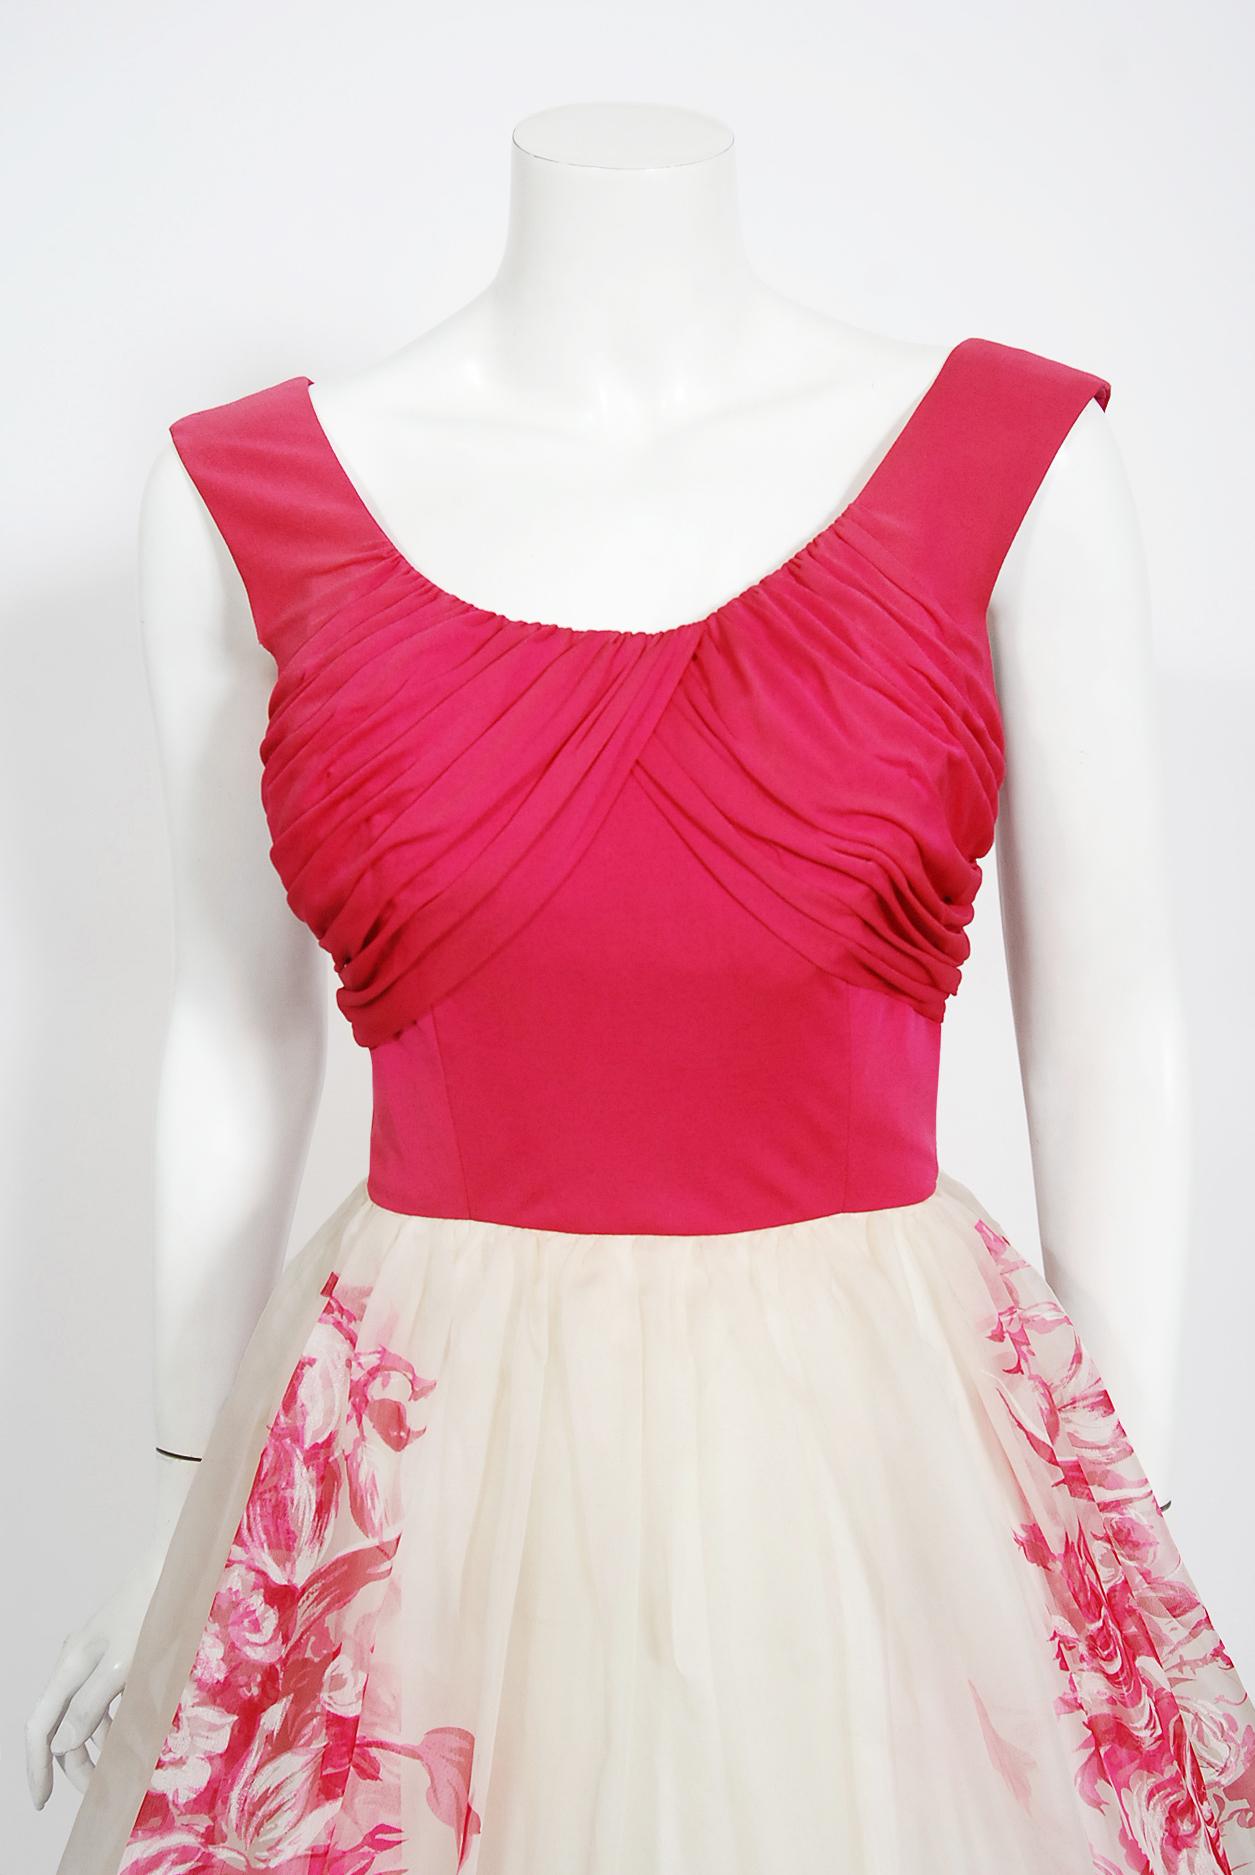 An absolutely exquisite 1950's magenta silk jersey hand-painted printed dress once owned by the talented Yma Sumac. Yma Sumac (1922–2008) was a noted Peruvian soprano and the original Queen of Exotica. Her International fame began in the early